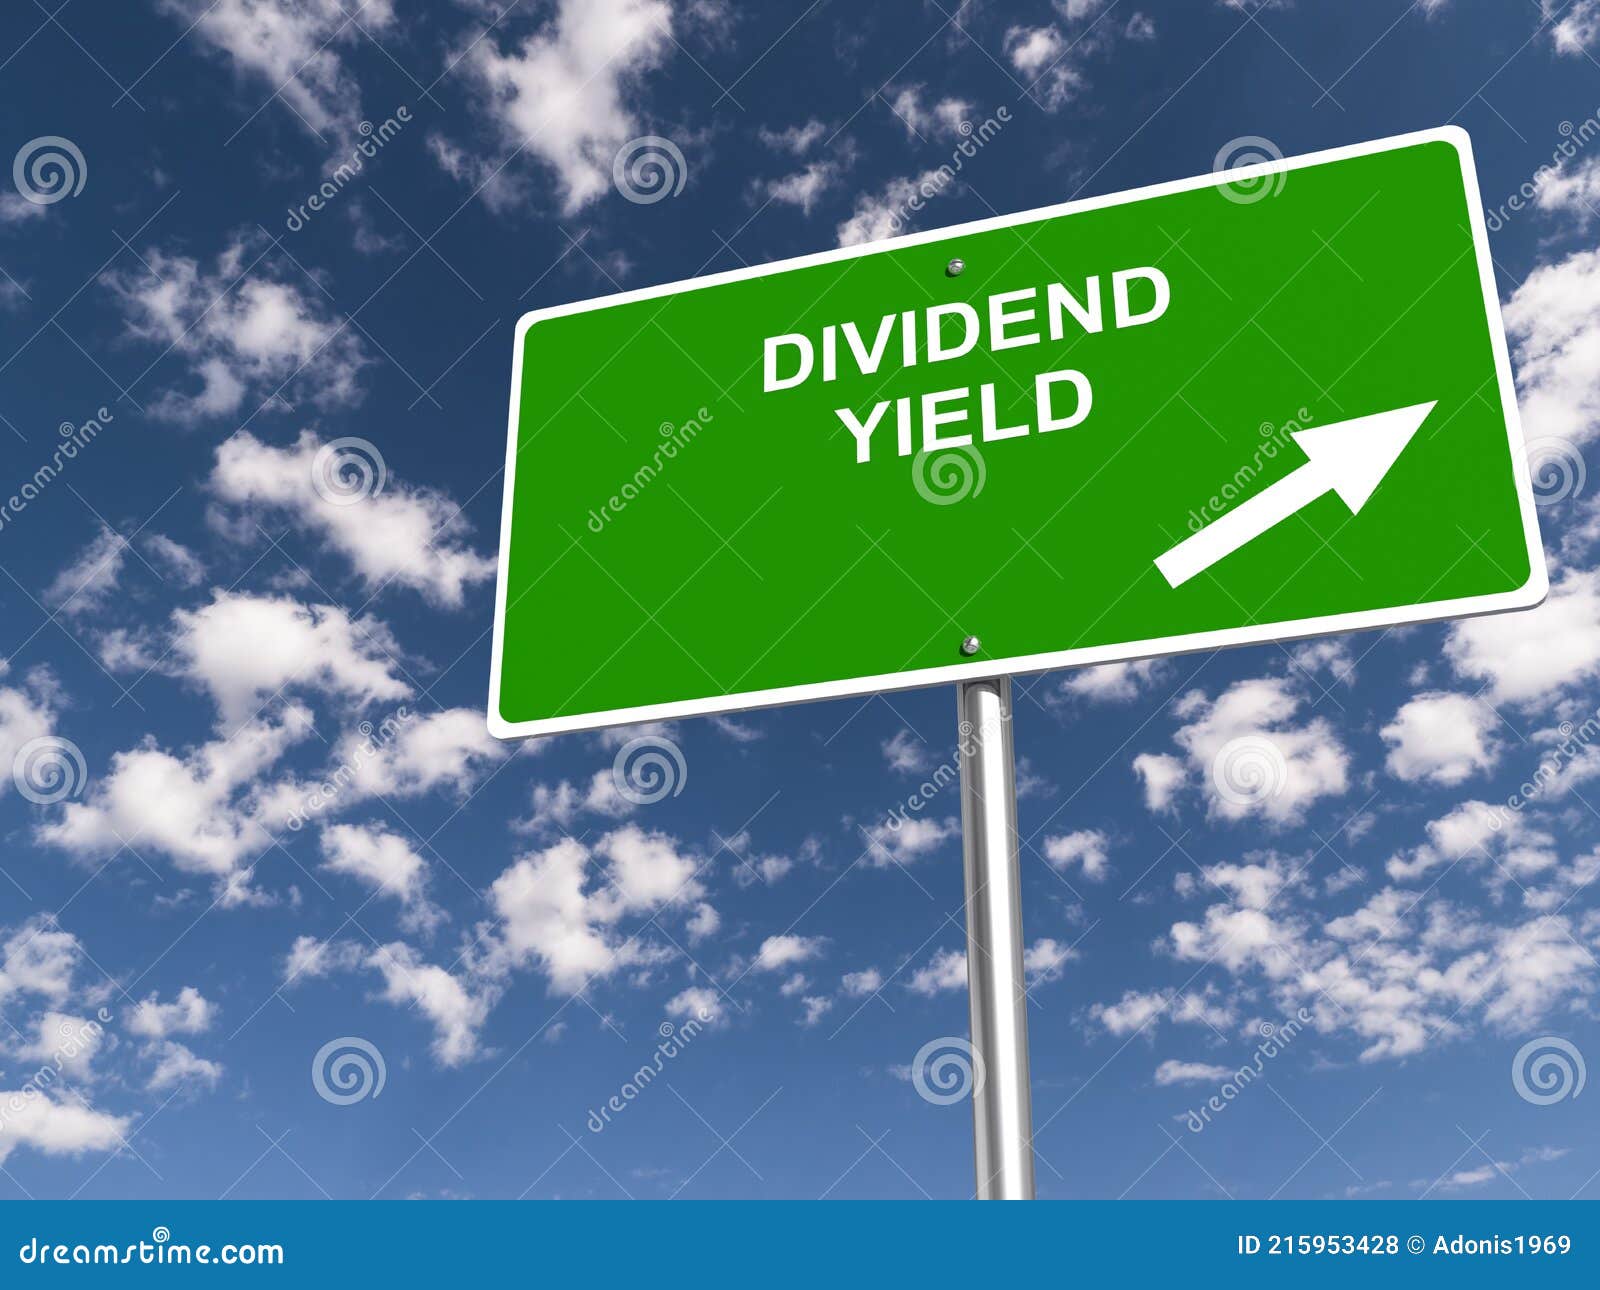 dividend yield traffic sign